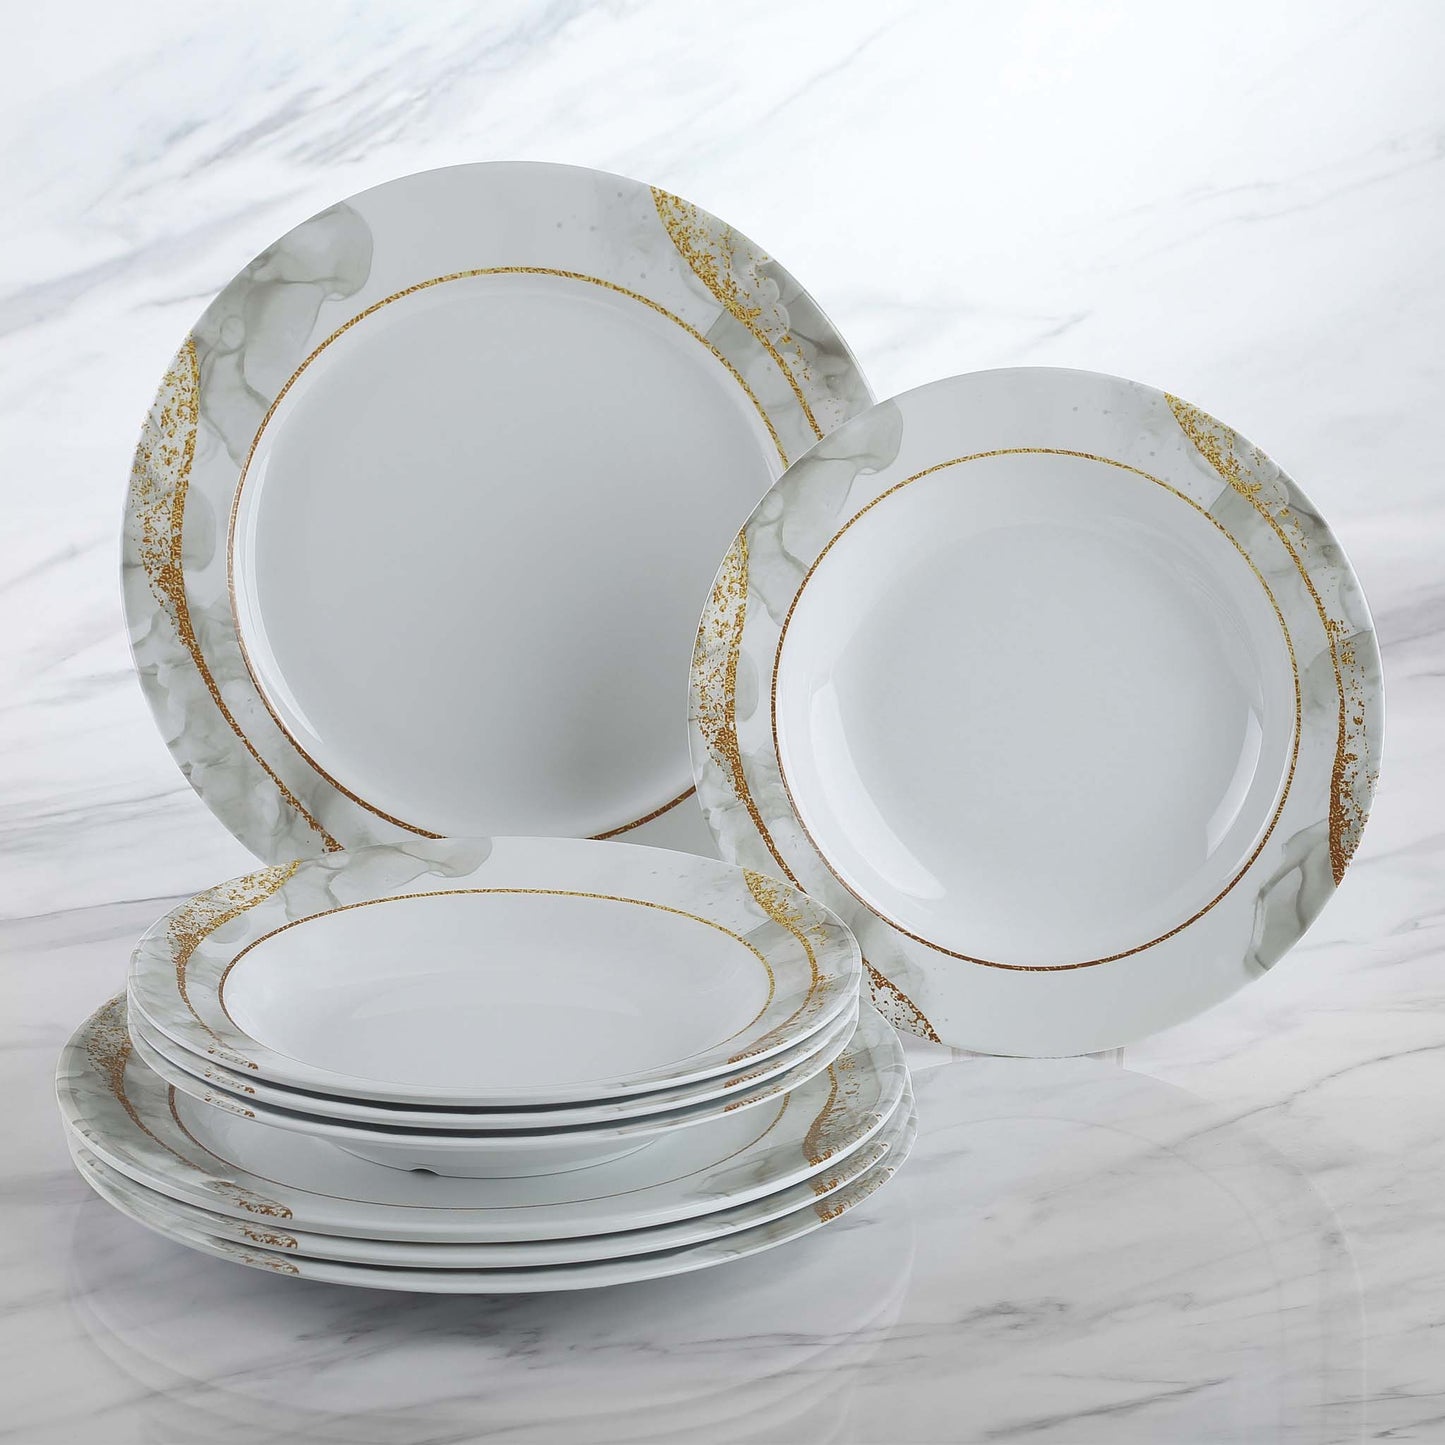 The Plate Story - Raya Collection Plate - Rim Round Shine (Set of 8)